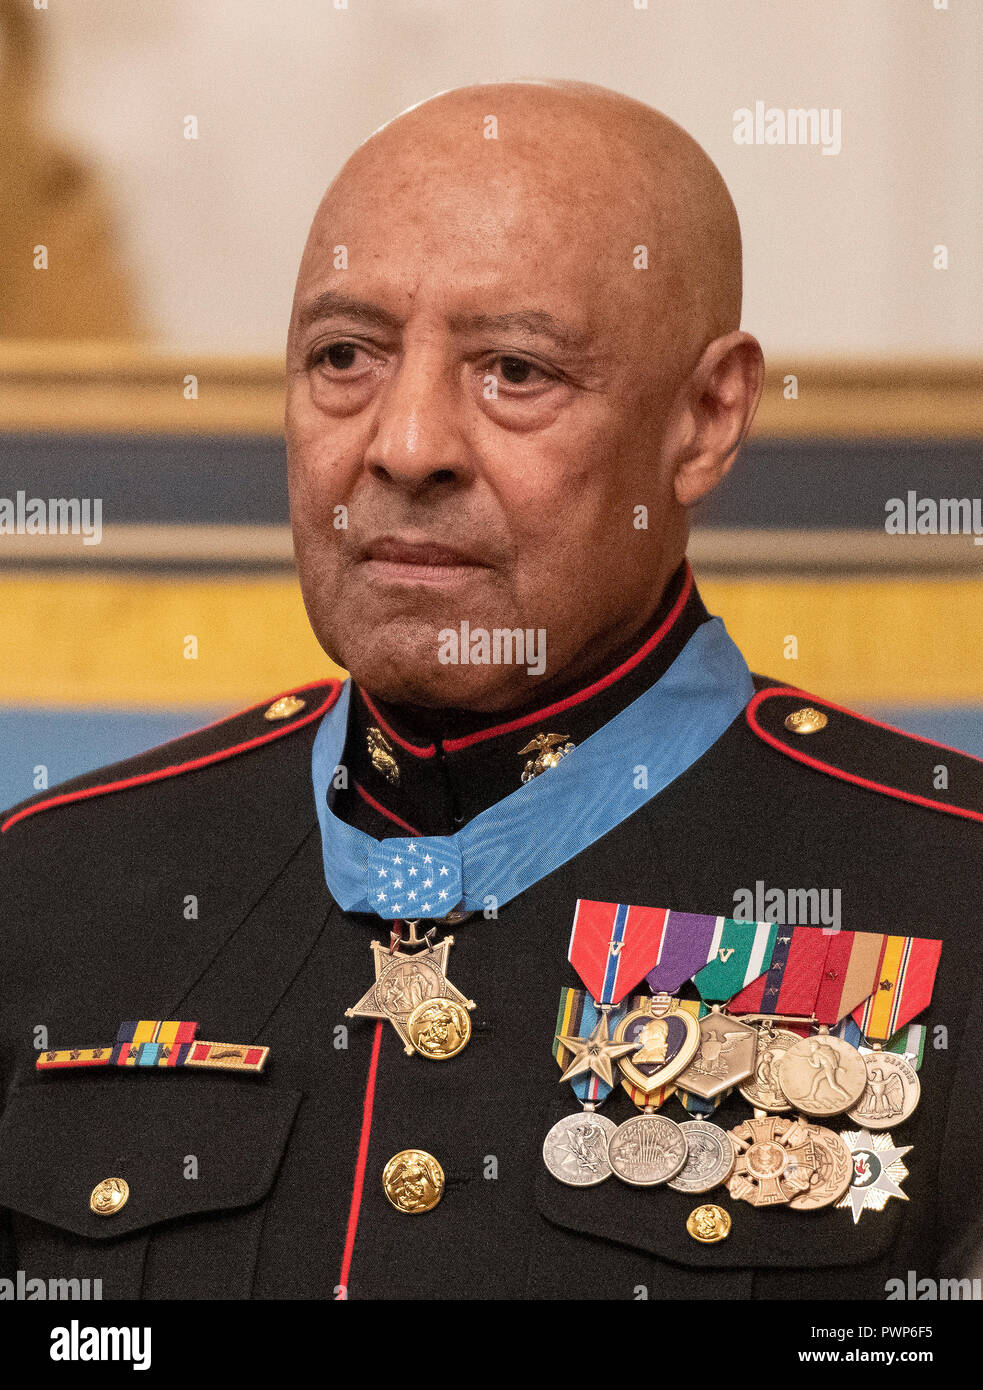 Washington, USA. 17th Oct 2018. Sergeant Major John L. Canley, United States Marine Corps (Retired) wears his medal at the conclusion of the ceremony where US President Donald J. Trump awarded him the Medal of Honor for conspicuous gallantry during the Vietnam War in a ceremony in the East Room of the the White House in Washington, DC on Wednesday, October 17, 2018. Credit: Ron Sachs/CNP/MediaPunch Credit: MediaPunch Inc/Alamy Live News Stock Photo